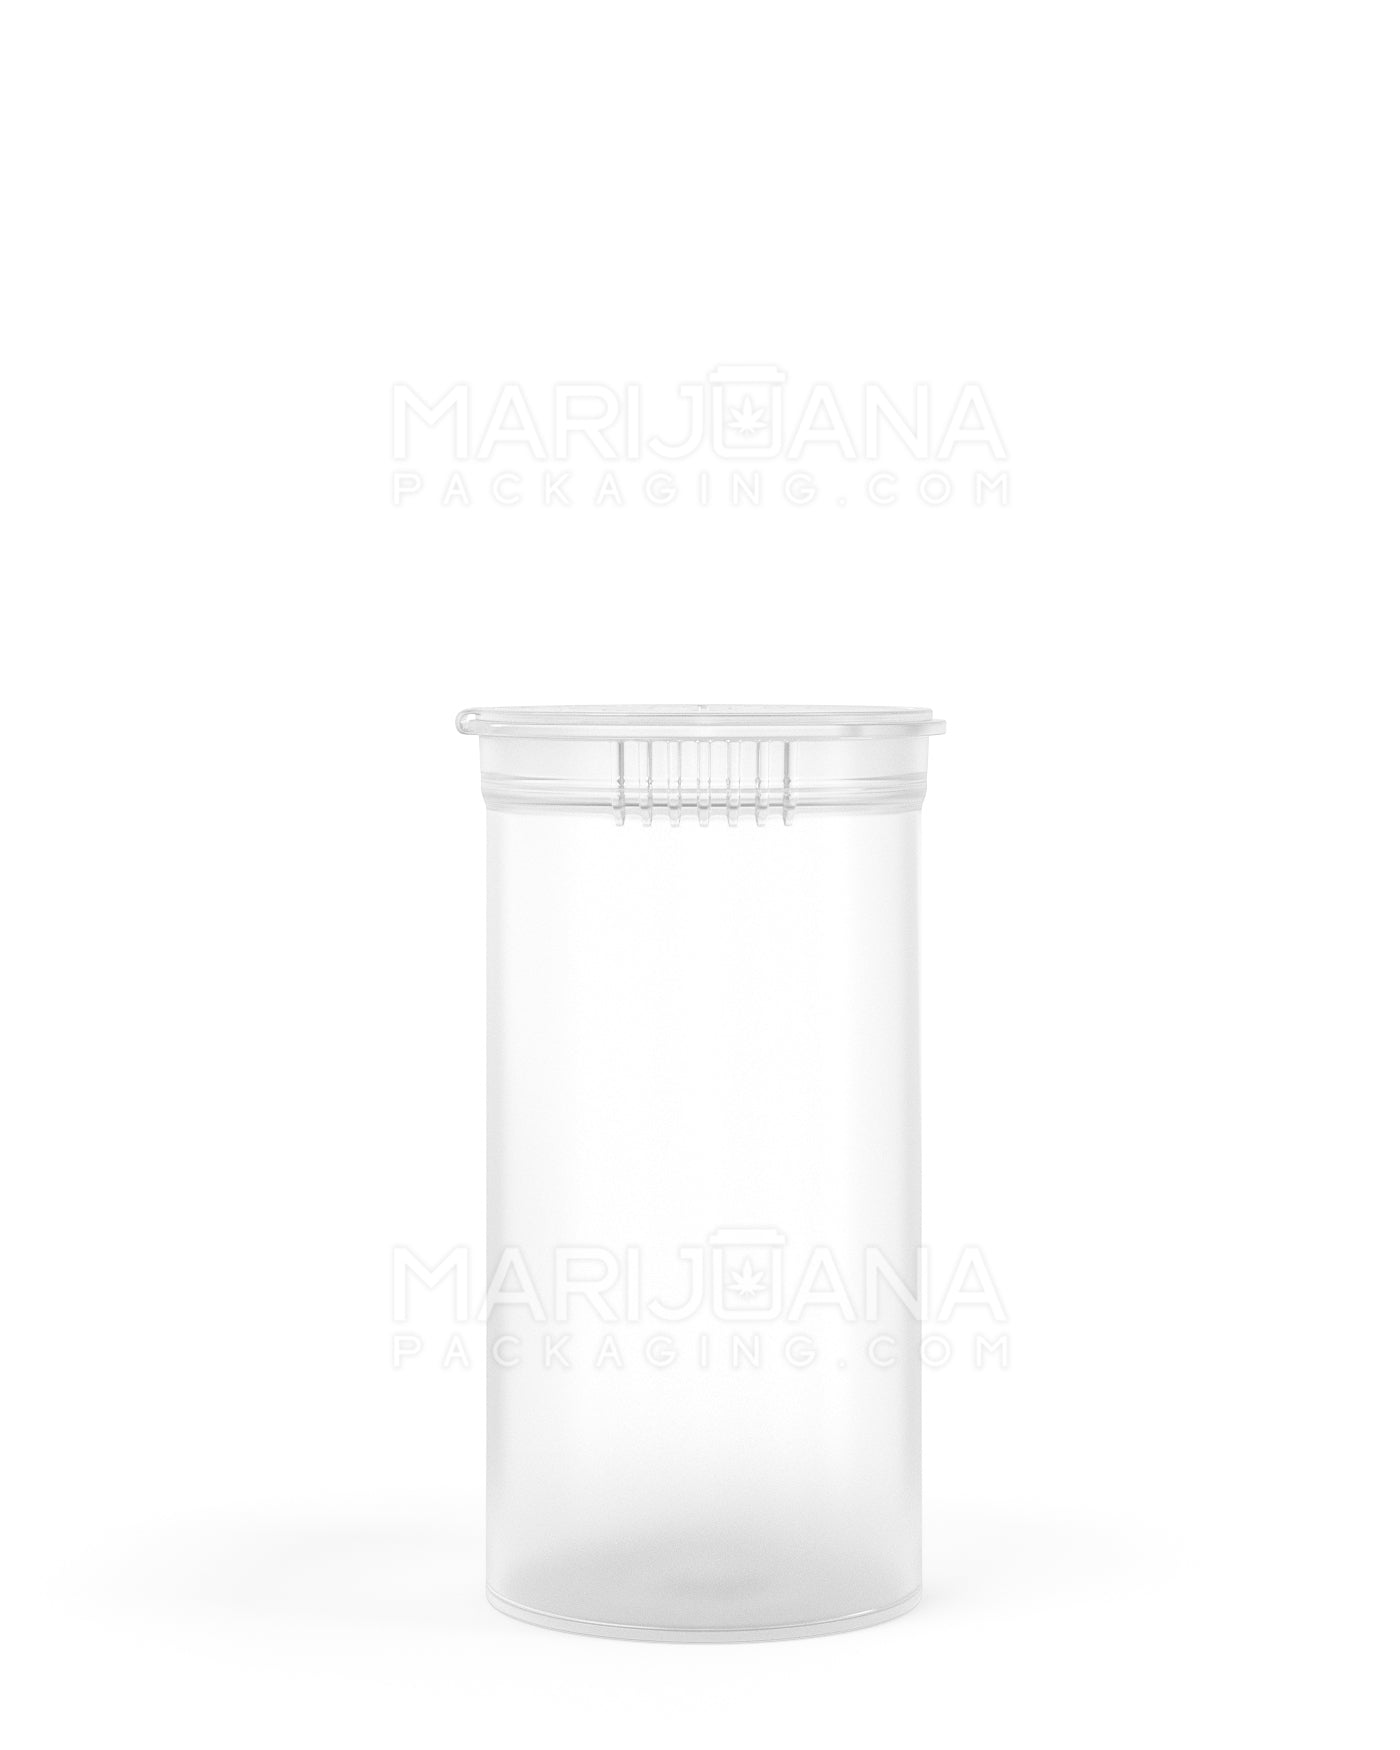 Child Resistant & Sustainable | 100% Biodegradable Clear Pop Top Bottles | 13dr - 2g - 315 Count - 2